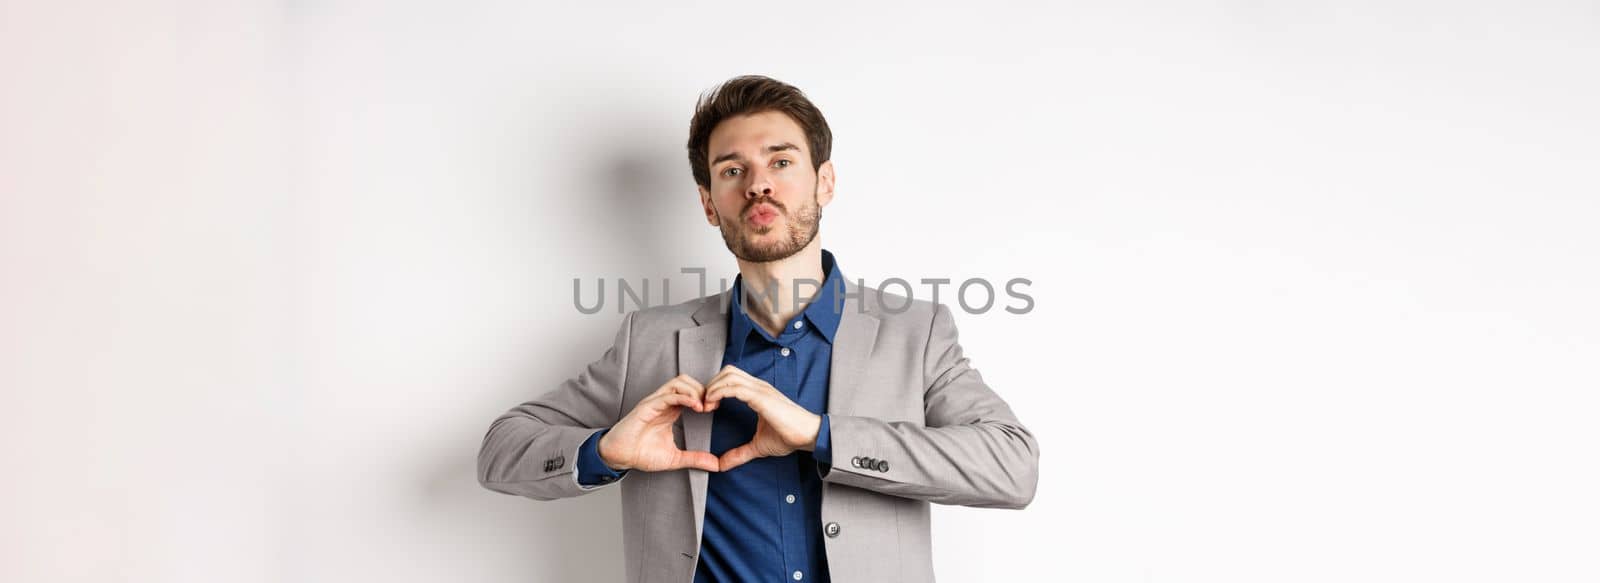 Romantic man in suit showing heart sign and pucker lips for kiss, express love and passion, like his lover, standing on white background.